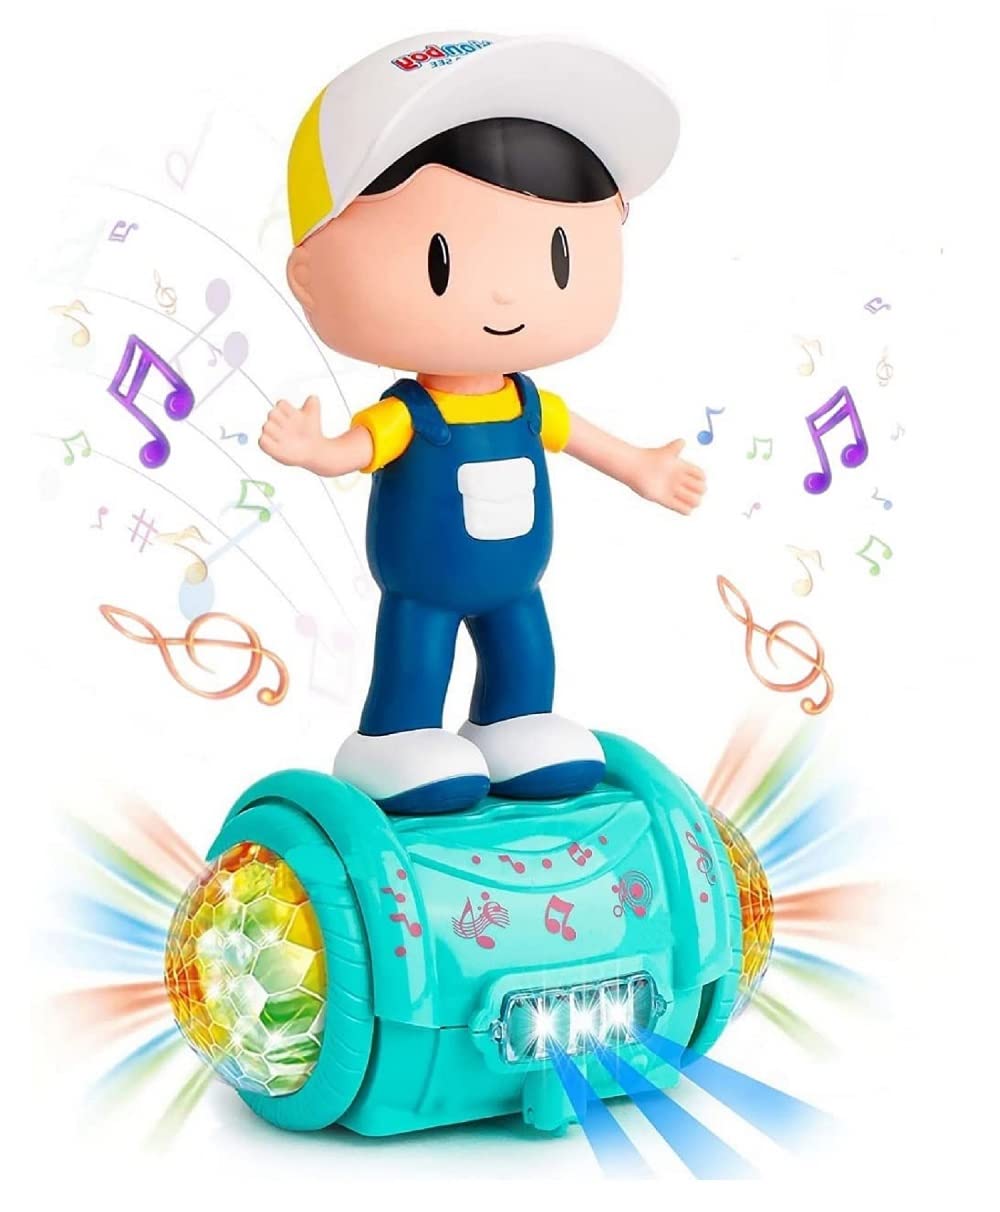 Dancing Boy Toy, 360 Degree Rotating Musical, With Flashing Lights Action, Activity Play Center Toy For Kid